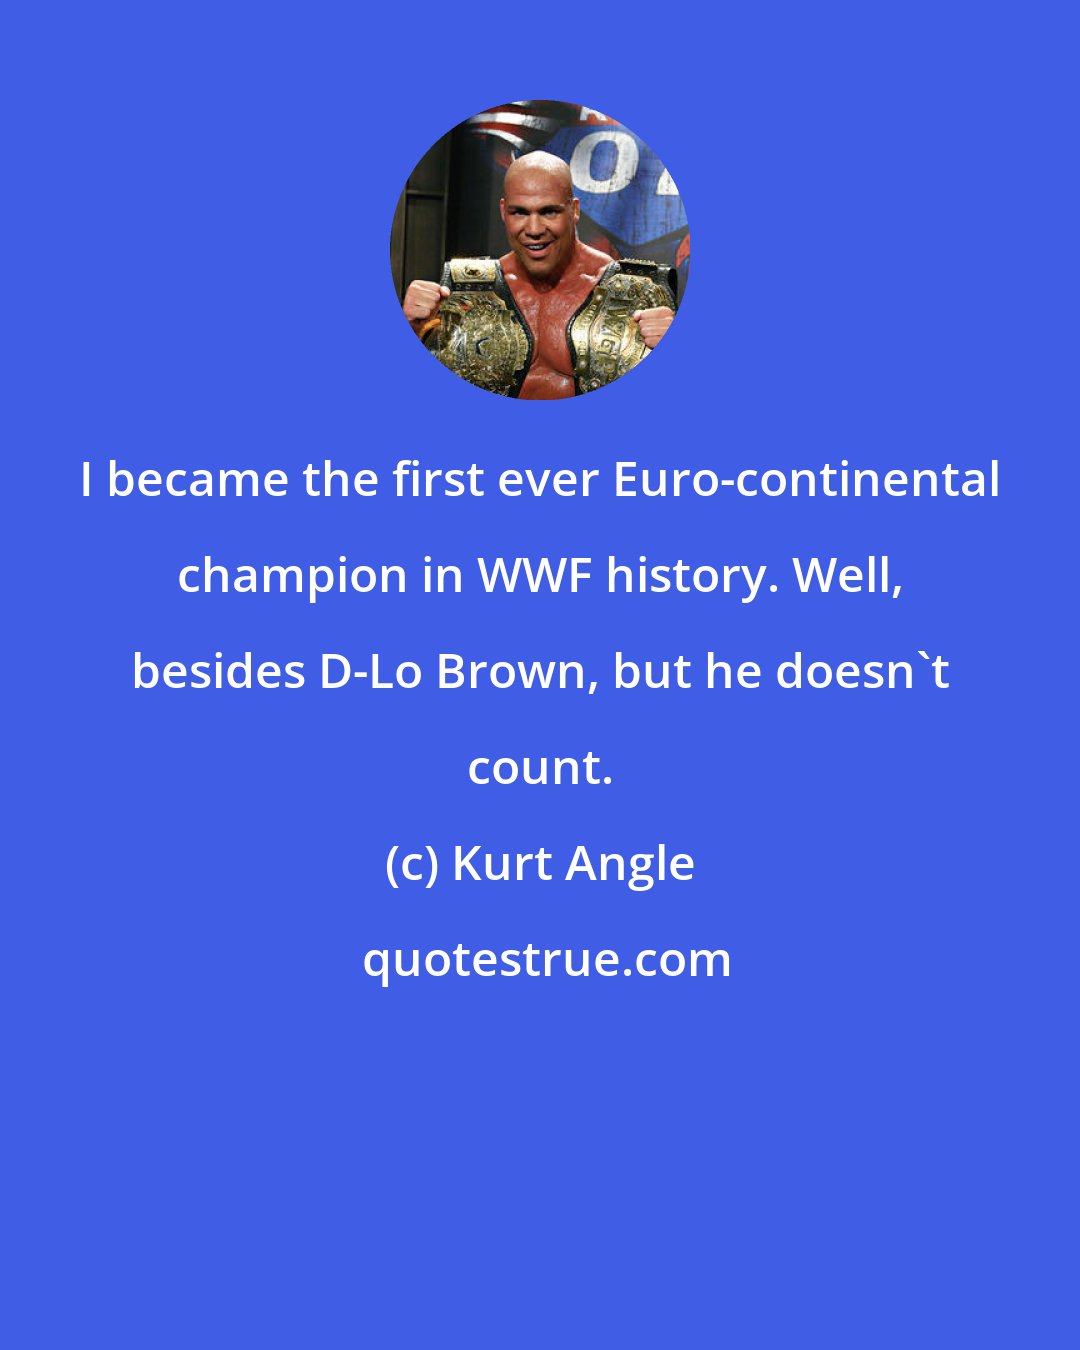 Kurt Angle: I became the first ever Euro-continental champion in WWF history. Well, besides D-Lo Brown, but he doesn't count.